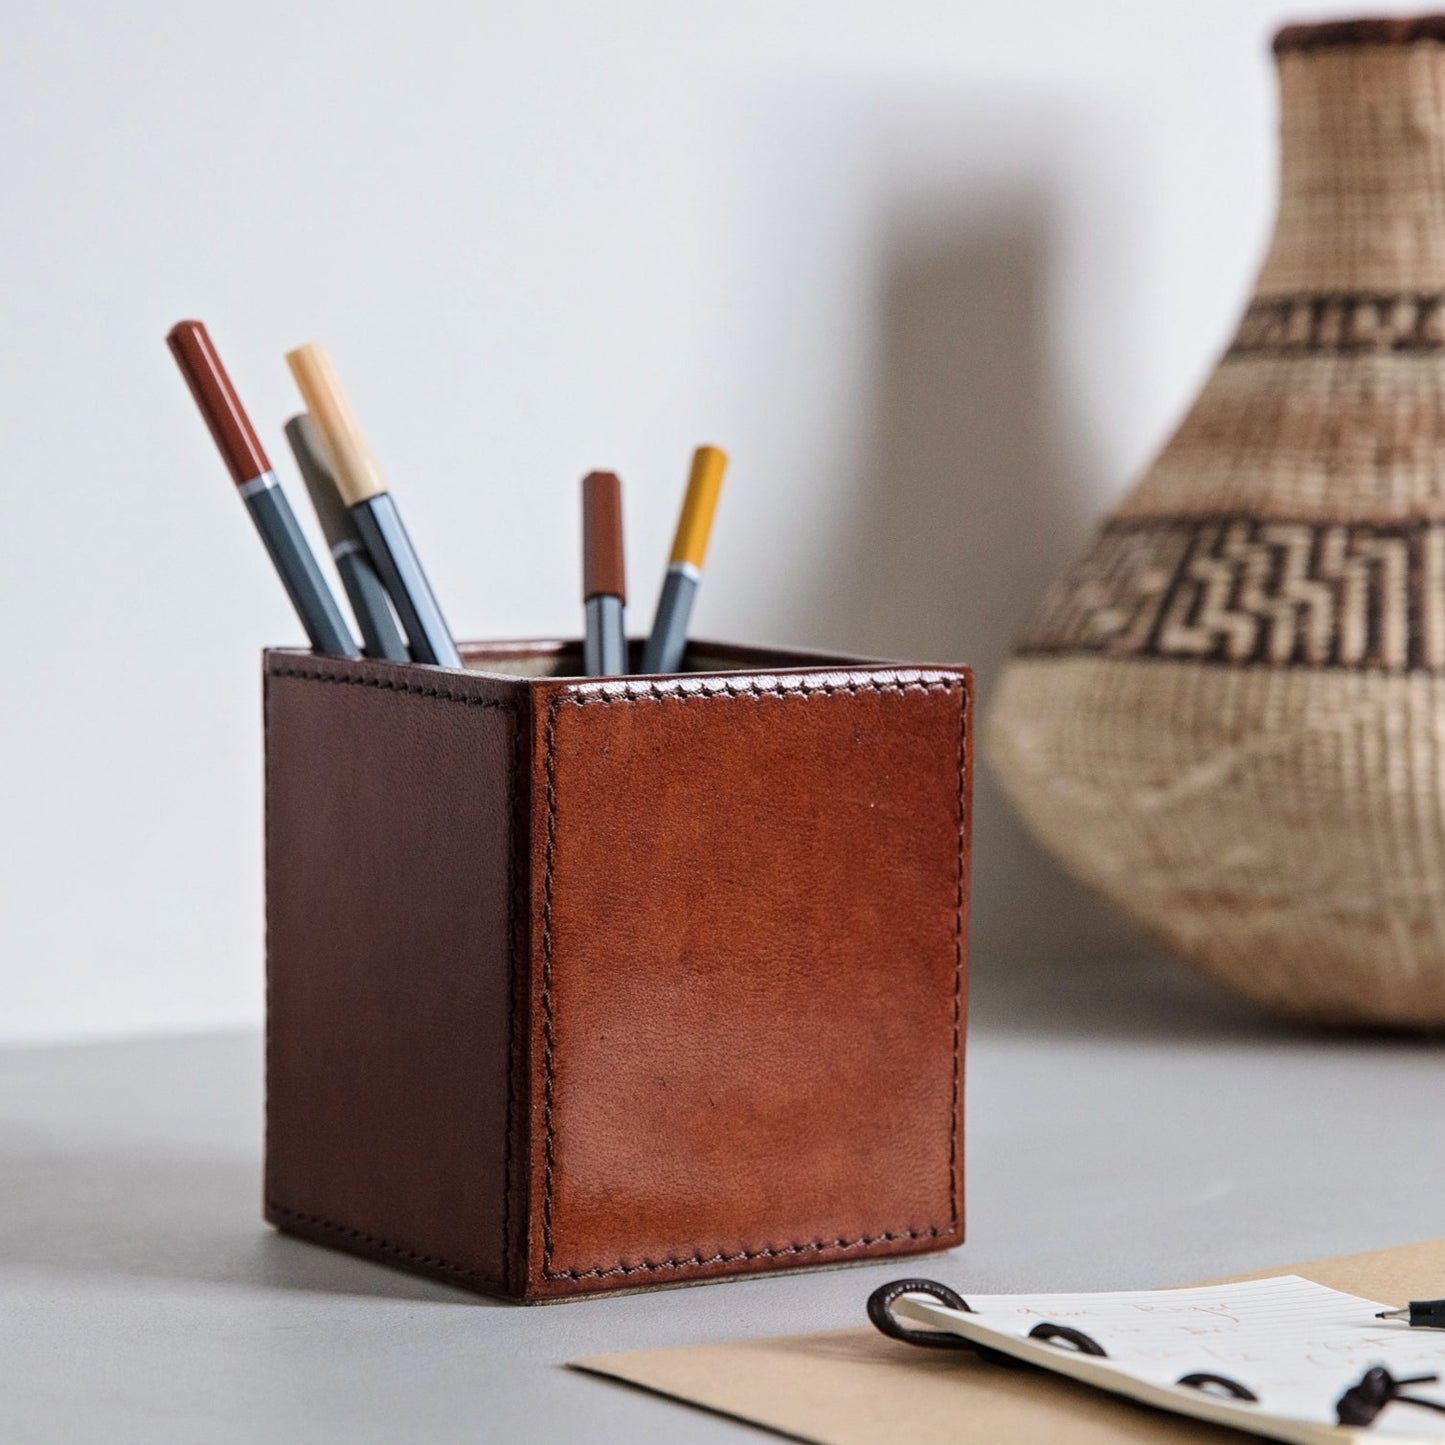 Elegant rectangular tan leather pen pot for easy desktop storage. Personalise for a thoughtful gift for the home, office or workplace.